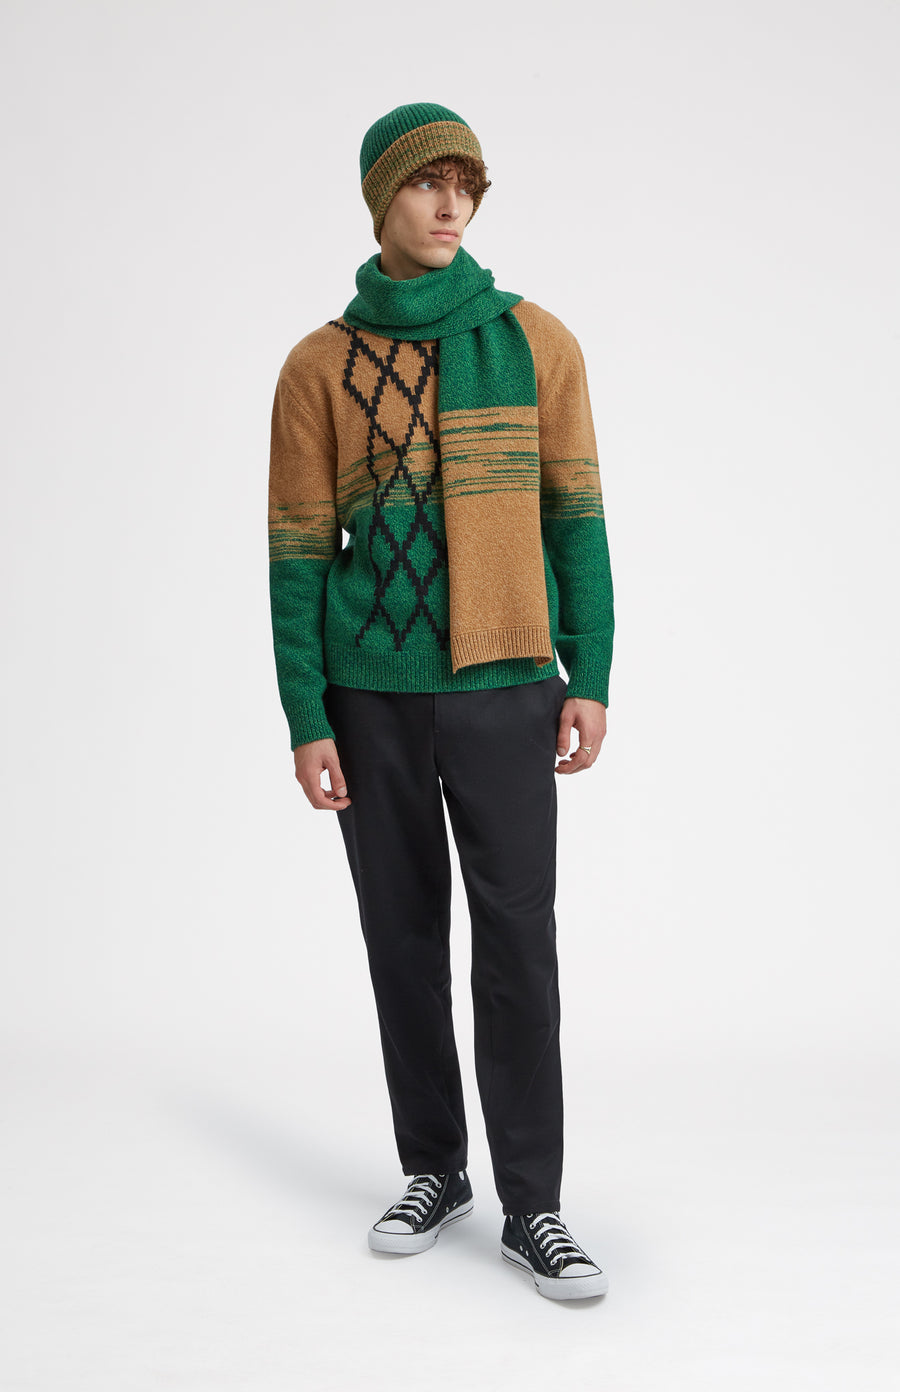 Lambswool Jumper with argyle in Vicuna & Evergreen with matching hat and scarf - Pringle of Scotland